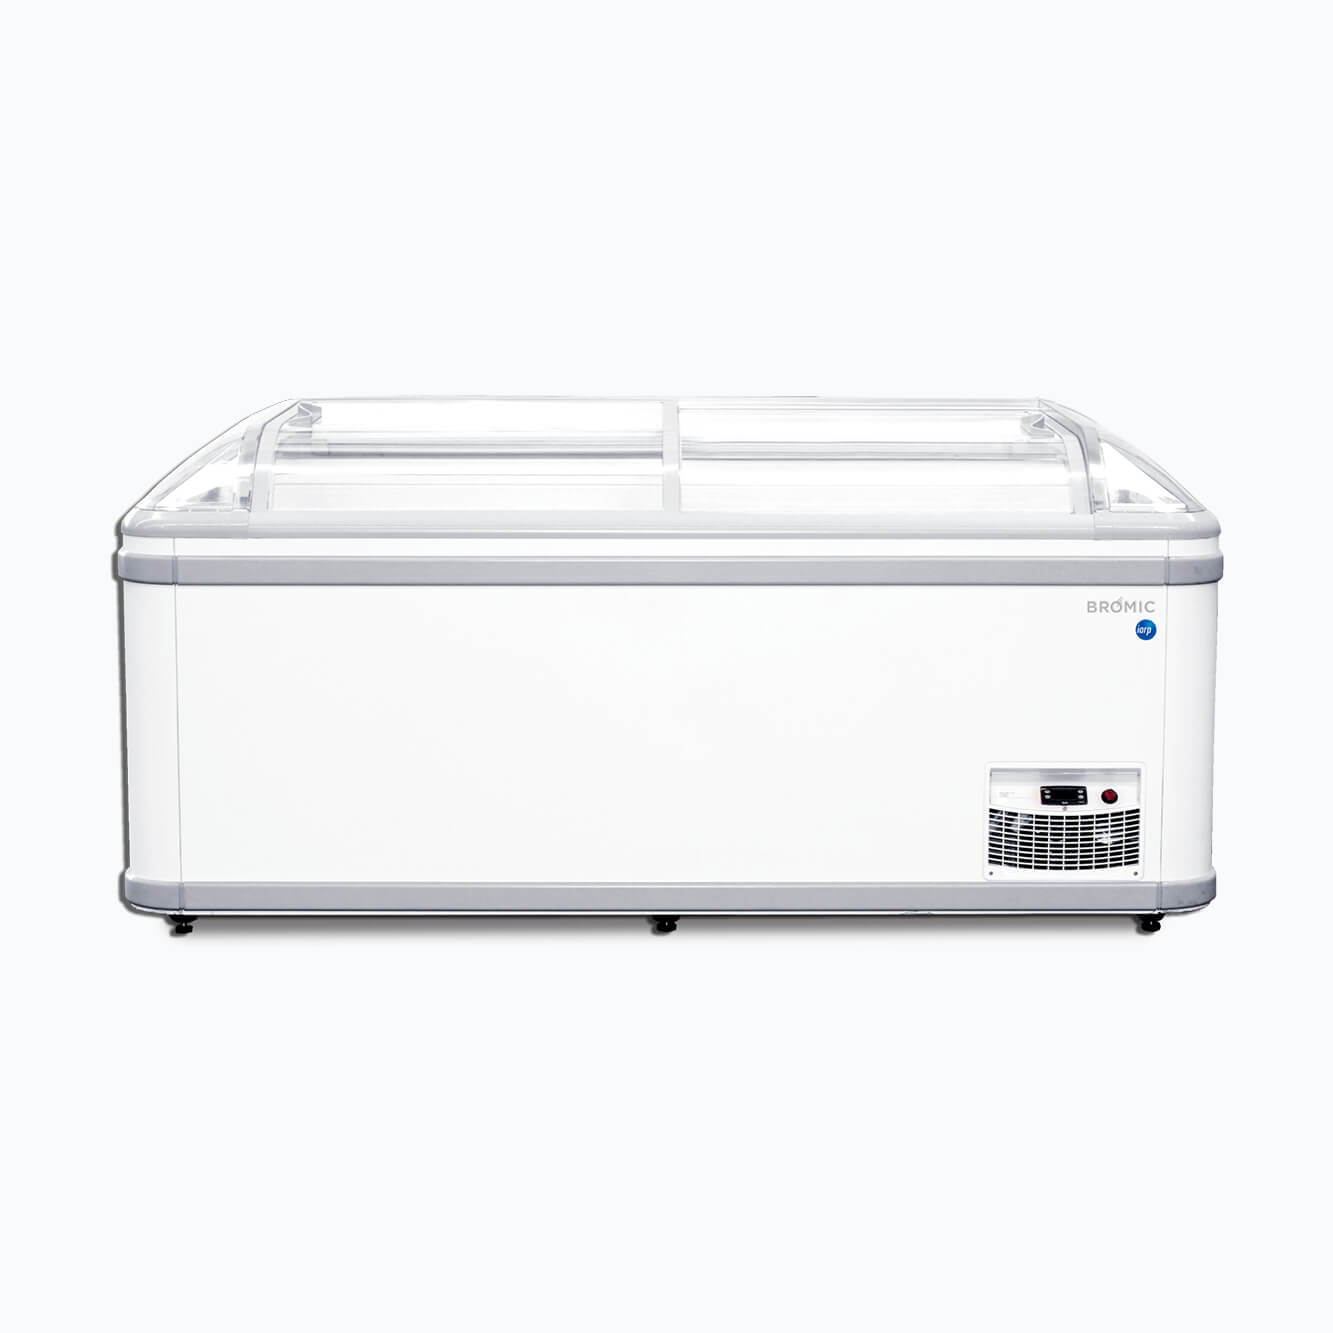 Image of a 1856mm wide white commercial island freezer, front view.